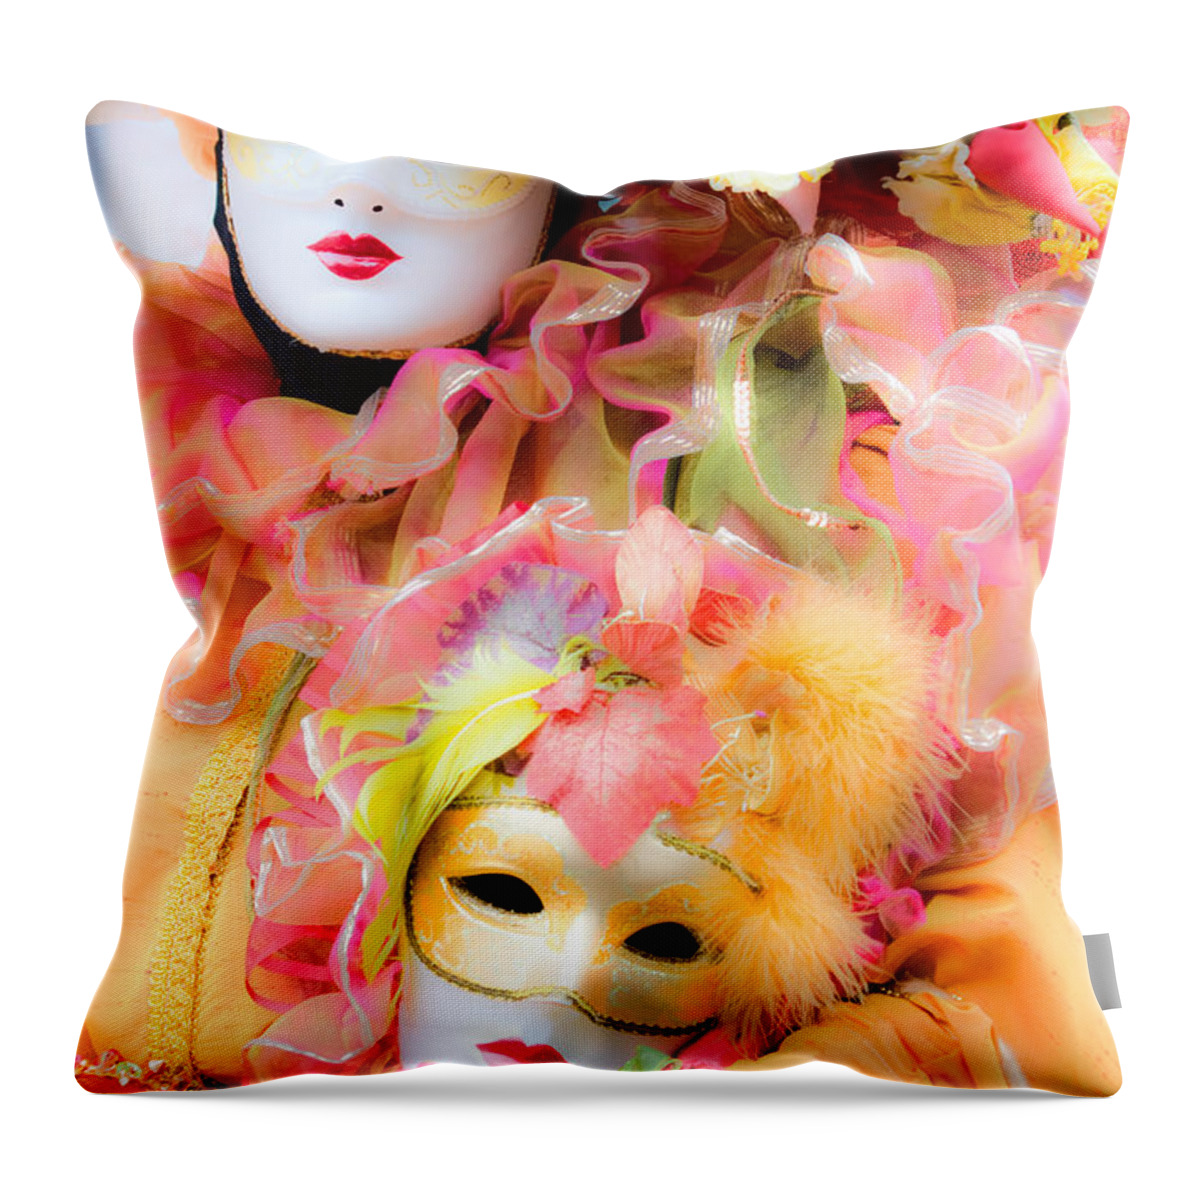 Carnaval Throw Pillow featuring the photograph Carnival Mask by Luciano Mortula